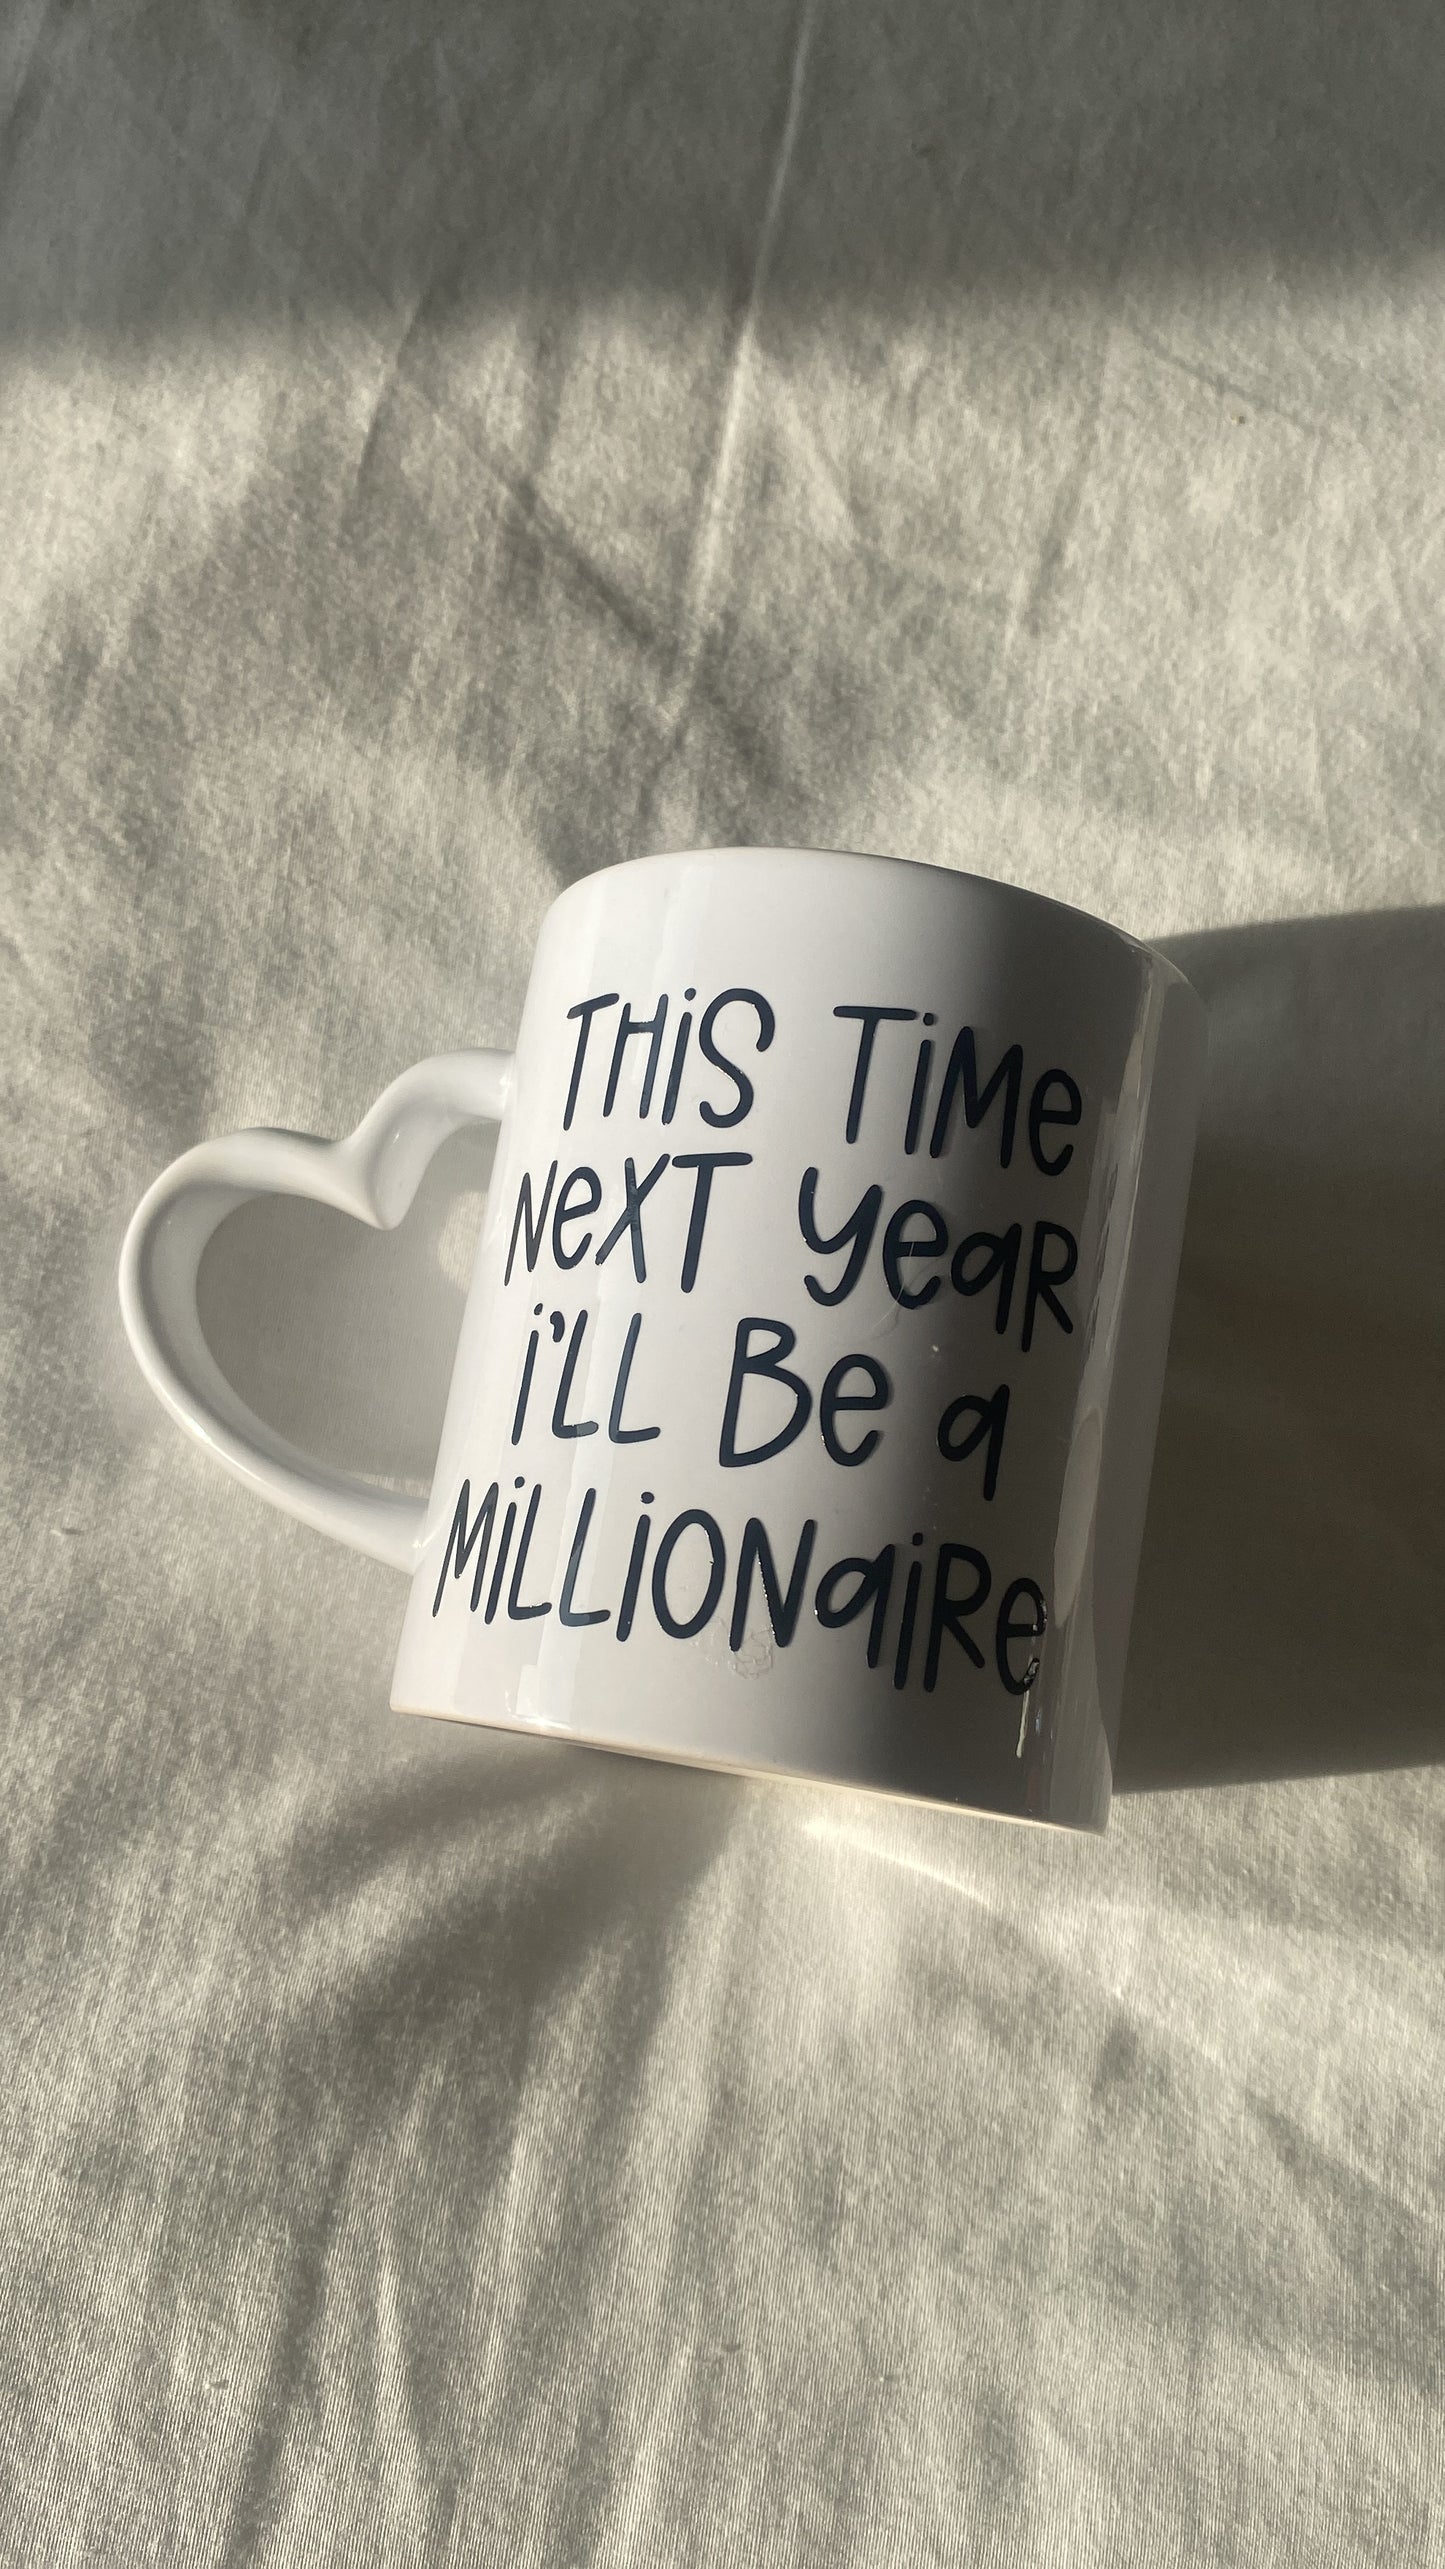 This time next year I’ll be a millionaire mug